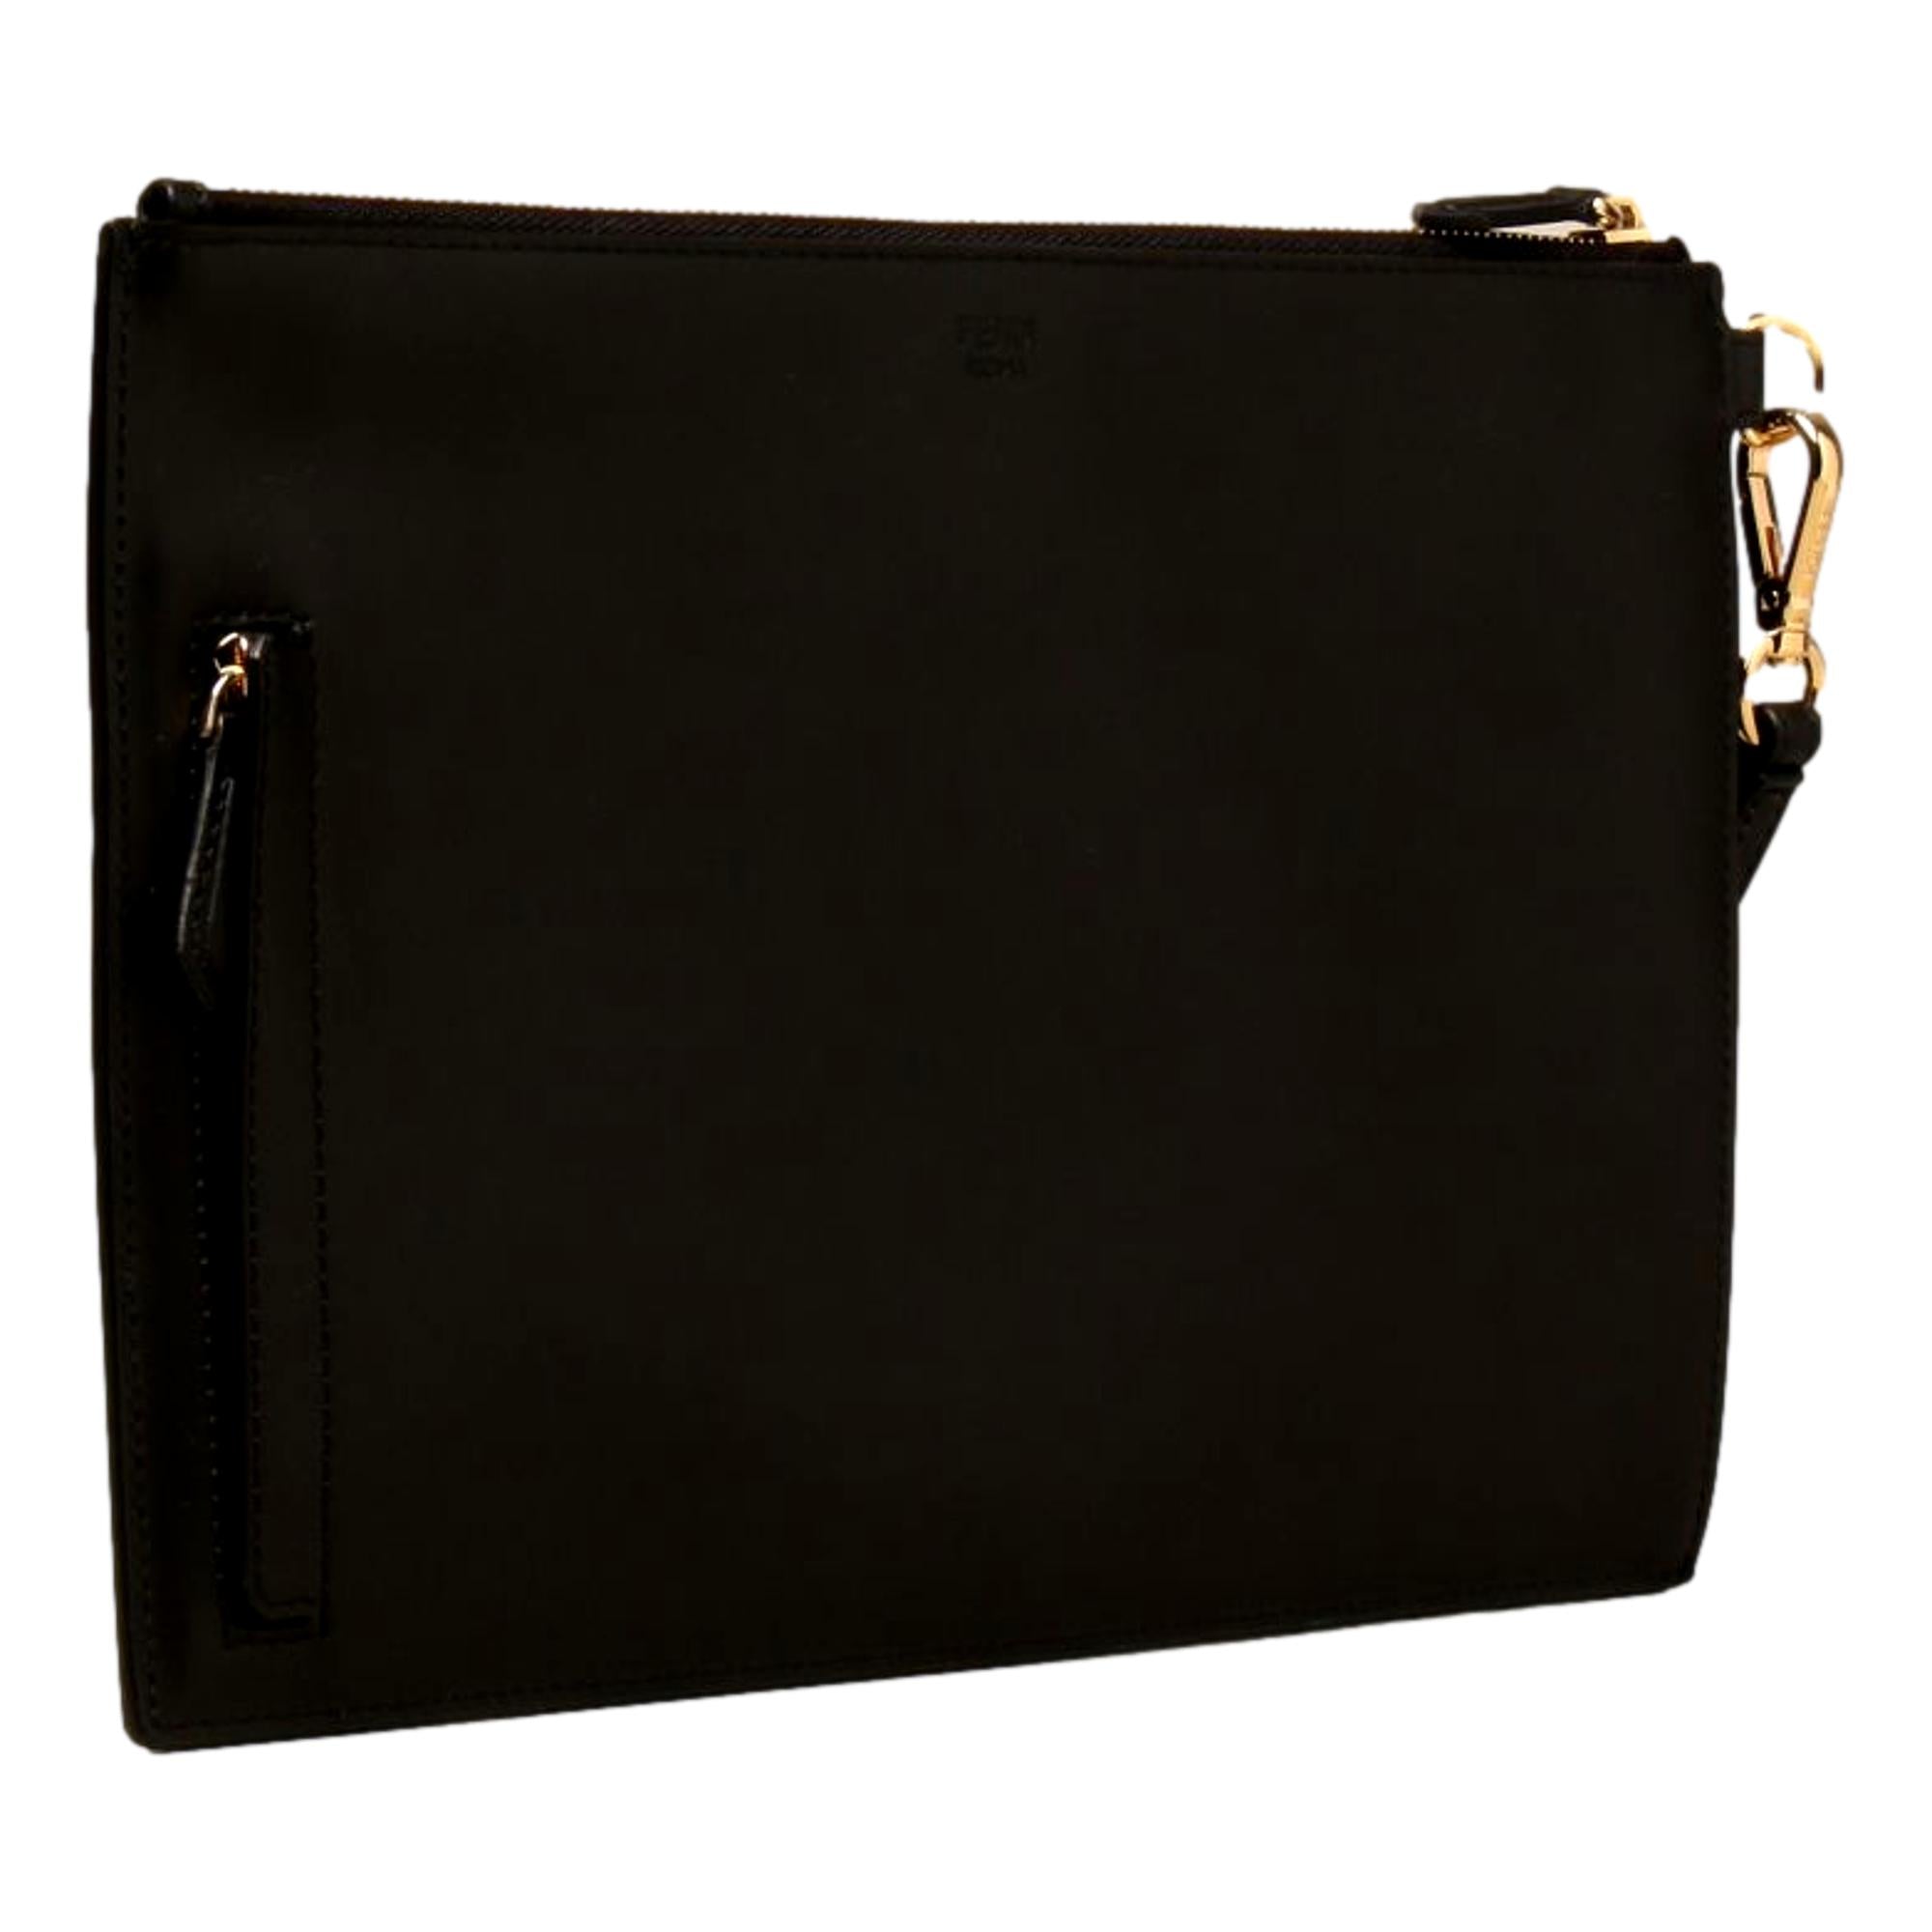 Fendi Bugs Black Calf Leather Gold Metal Wristlet Clutch 7N0110 at_Queen_Bee_of_Beverly_Hills